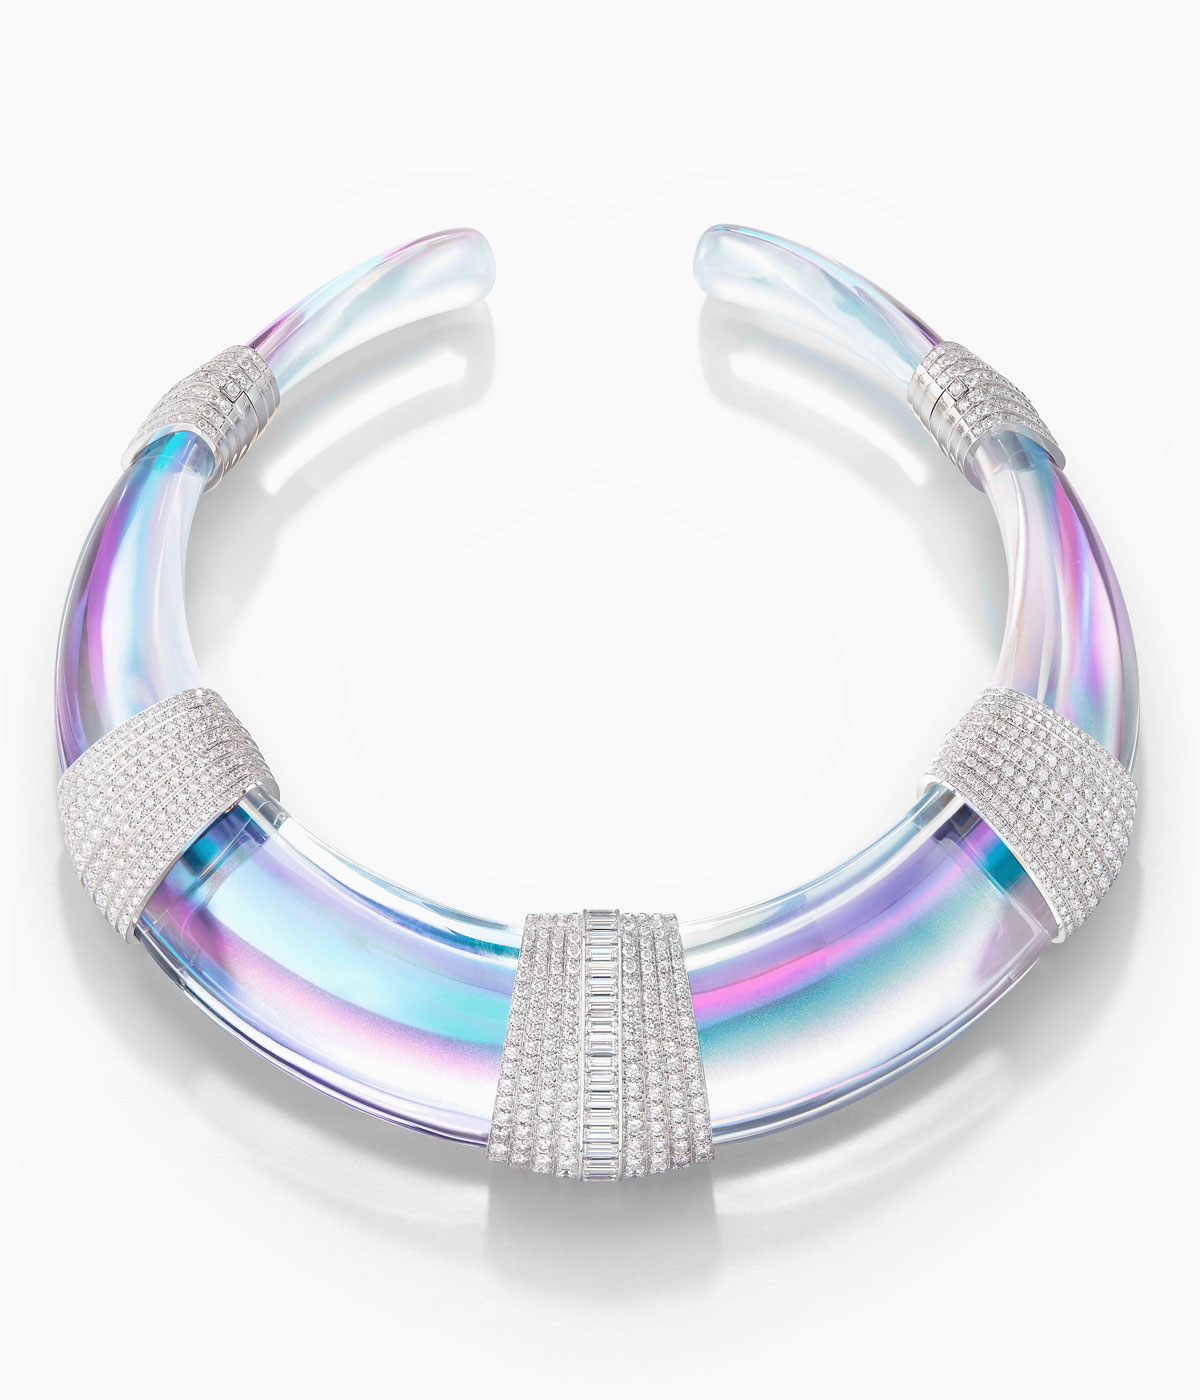 Holographic necklace with diamonds on it